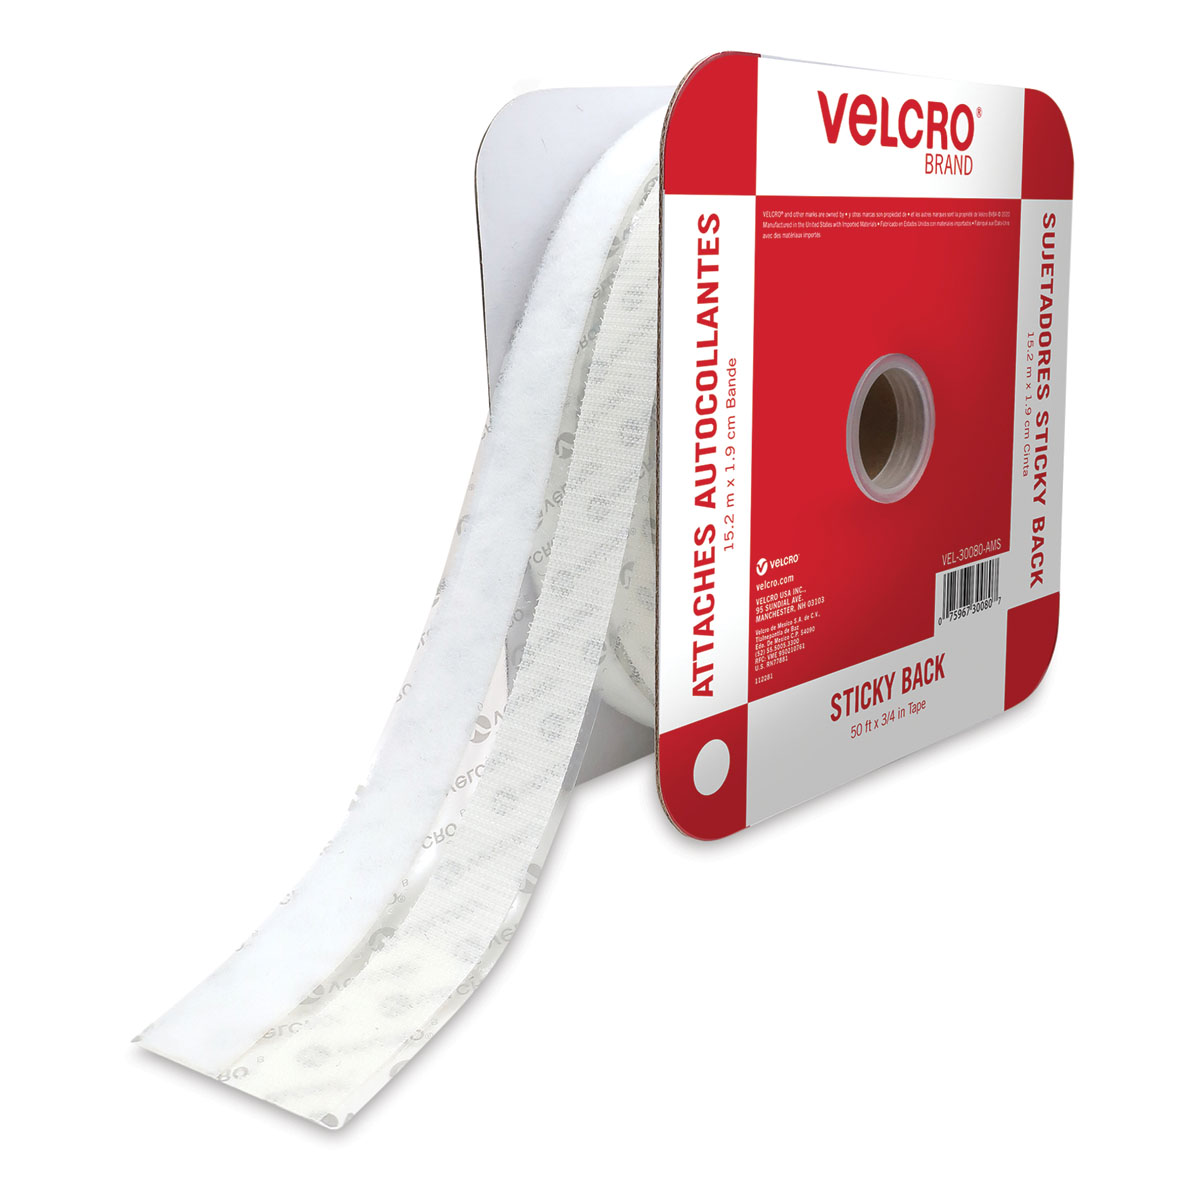 VELCRO® Brand Sticky Back for Fabrics 24in x 3/4in Roll White